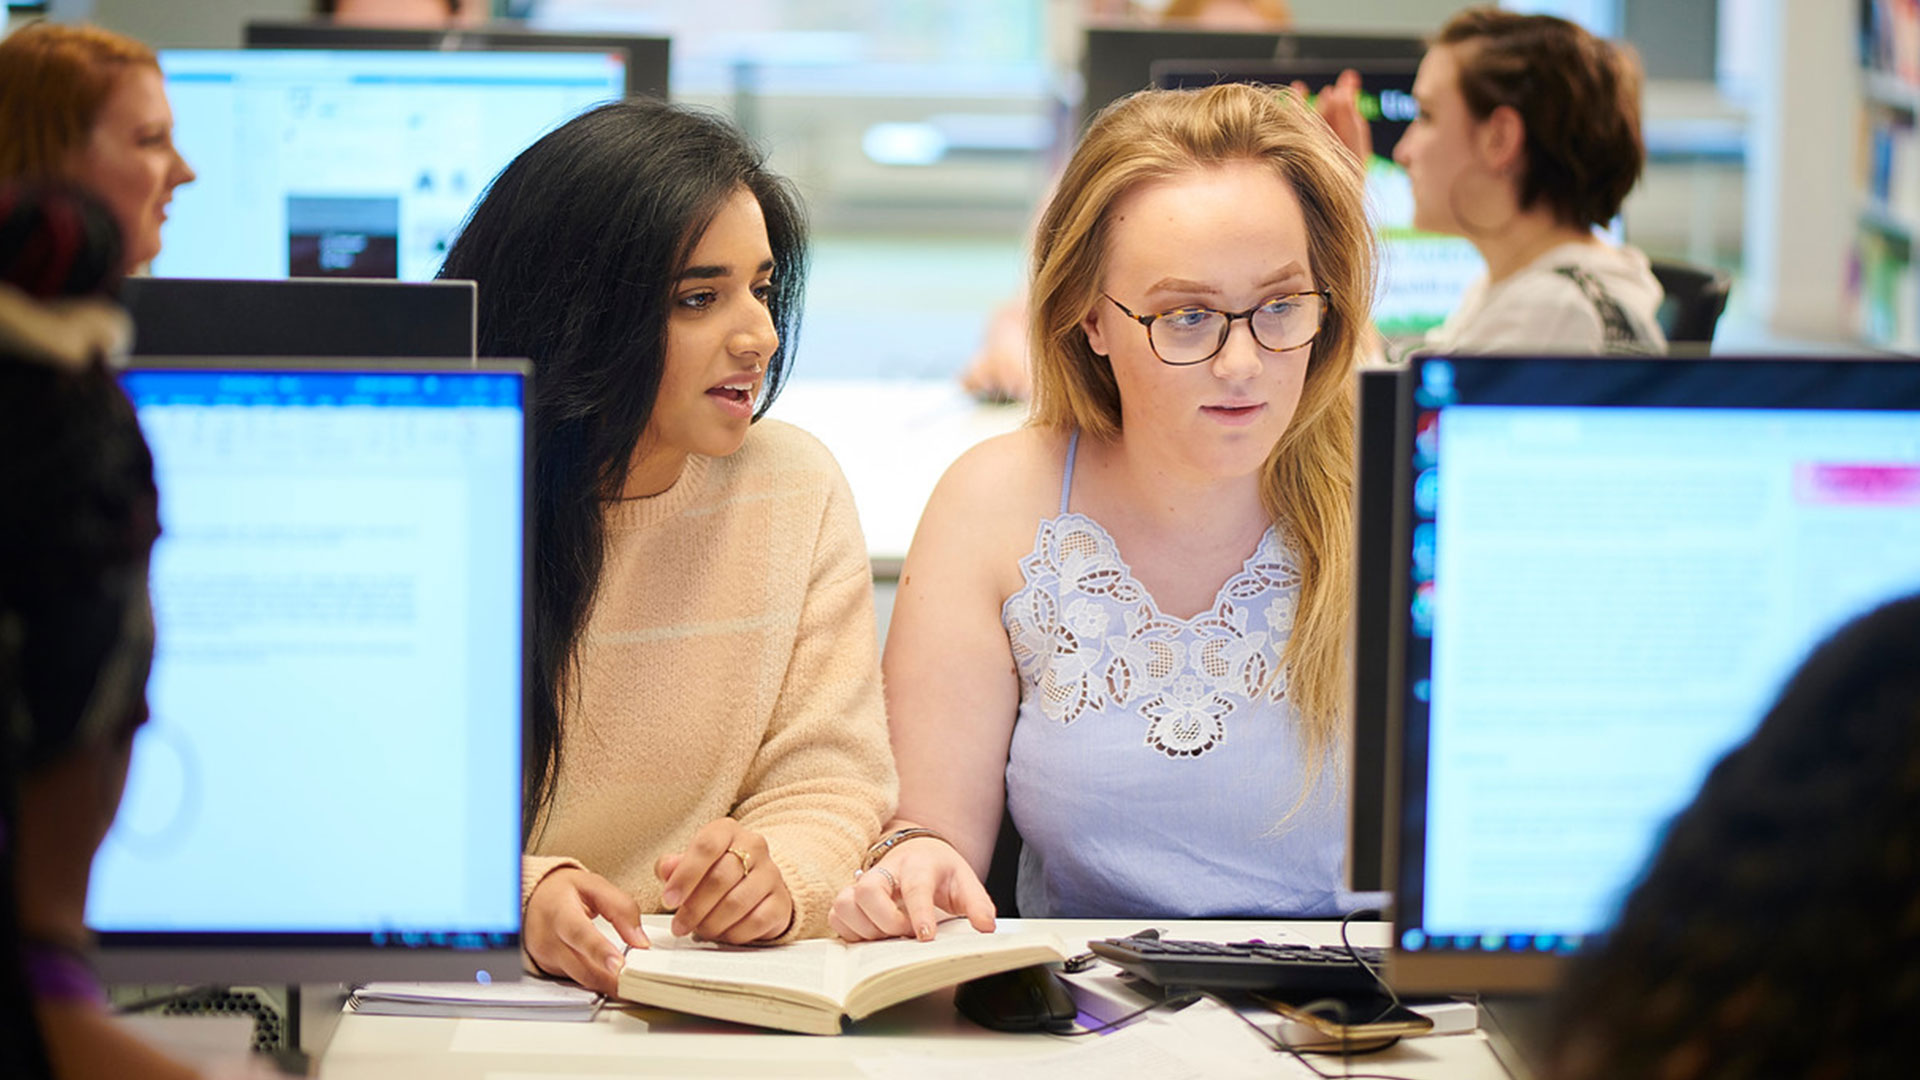 Two students in a computer lab looking at a book and a computer